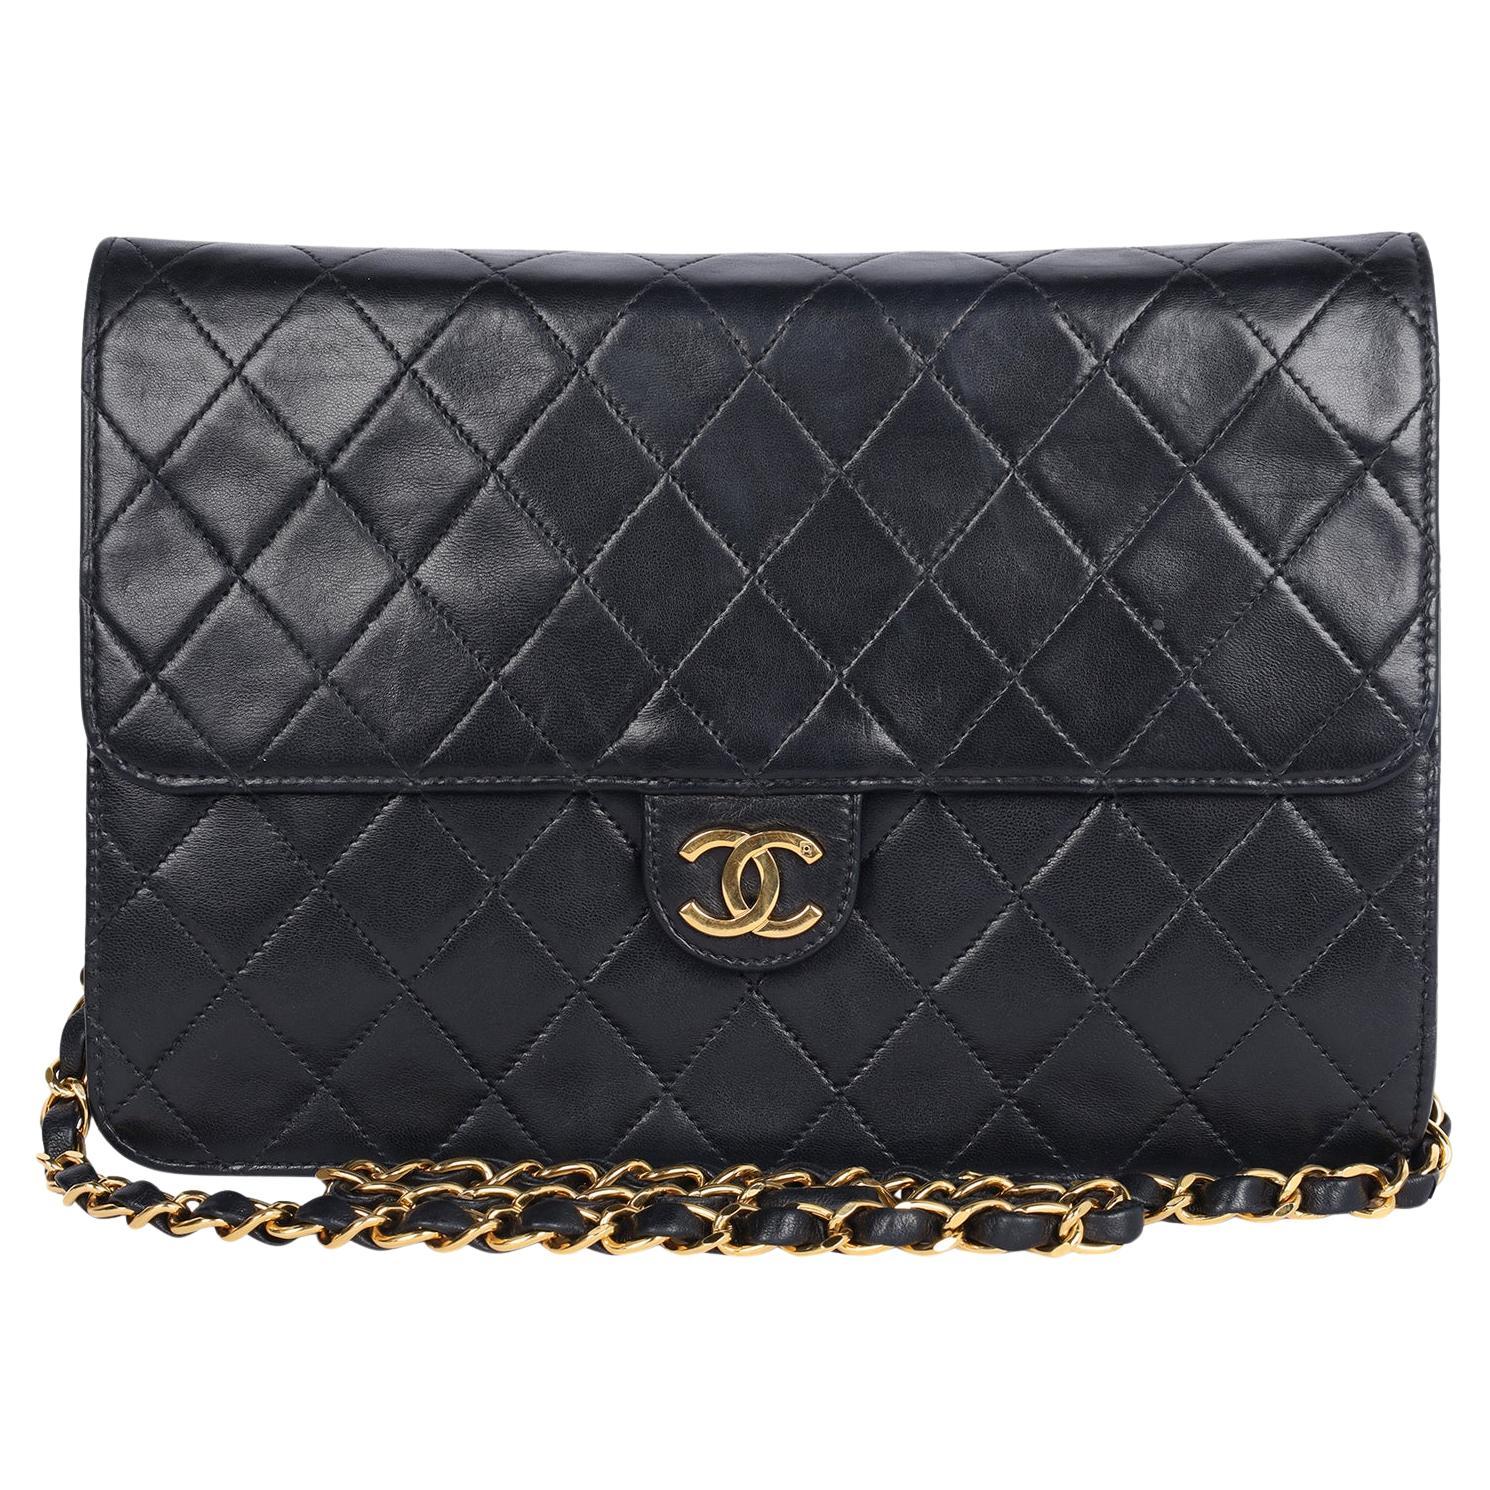 Authentic, pre-loved black lambskin leather Chanel classic single flap snap closure bag. Features front flap closure with CC snap closure, lambskin leather, large interior with zipper slip pocket, long gold weaved leather chain, 24 kt gold plated